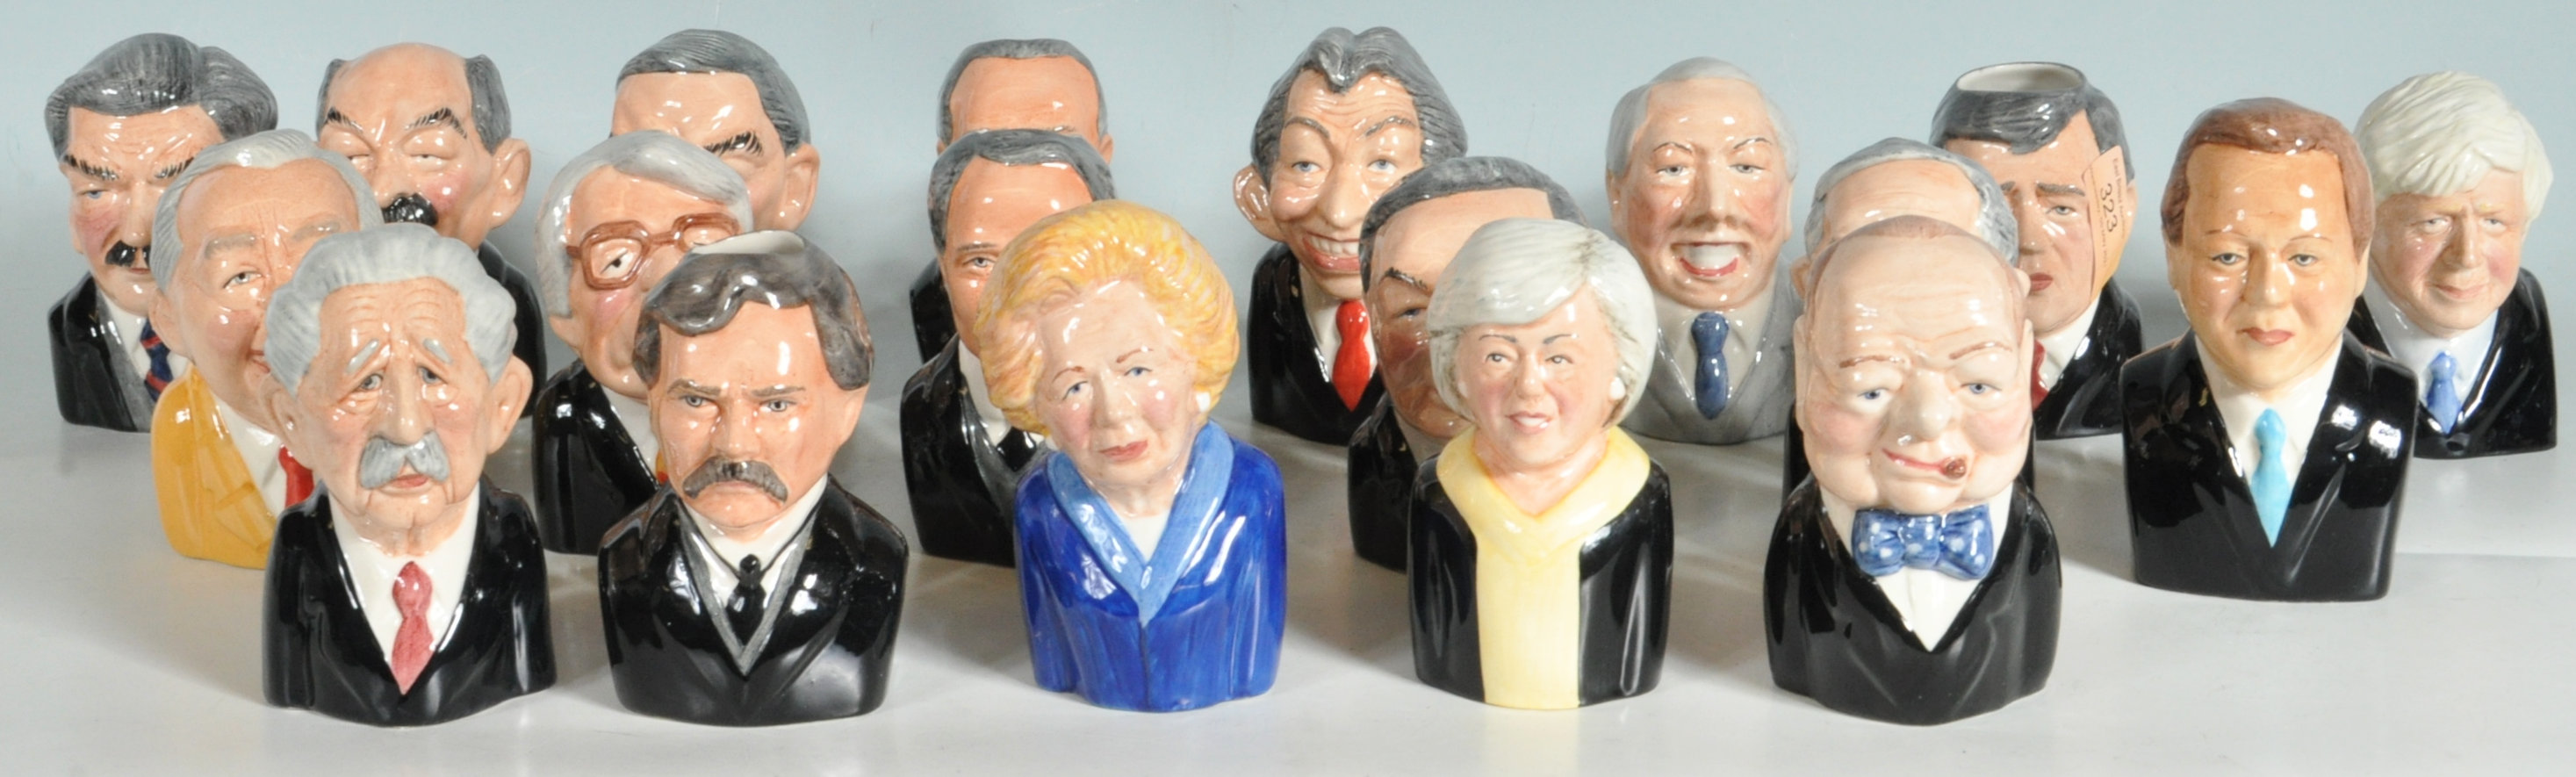 BRITISH PRIME MINISTERS CHARACTER JUGS BY MANOR COLLECTABLES.